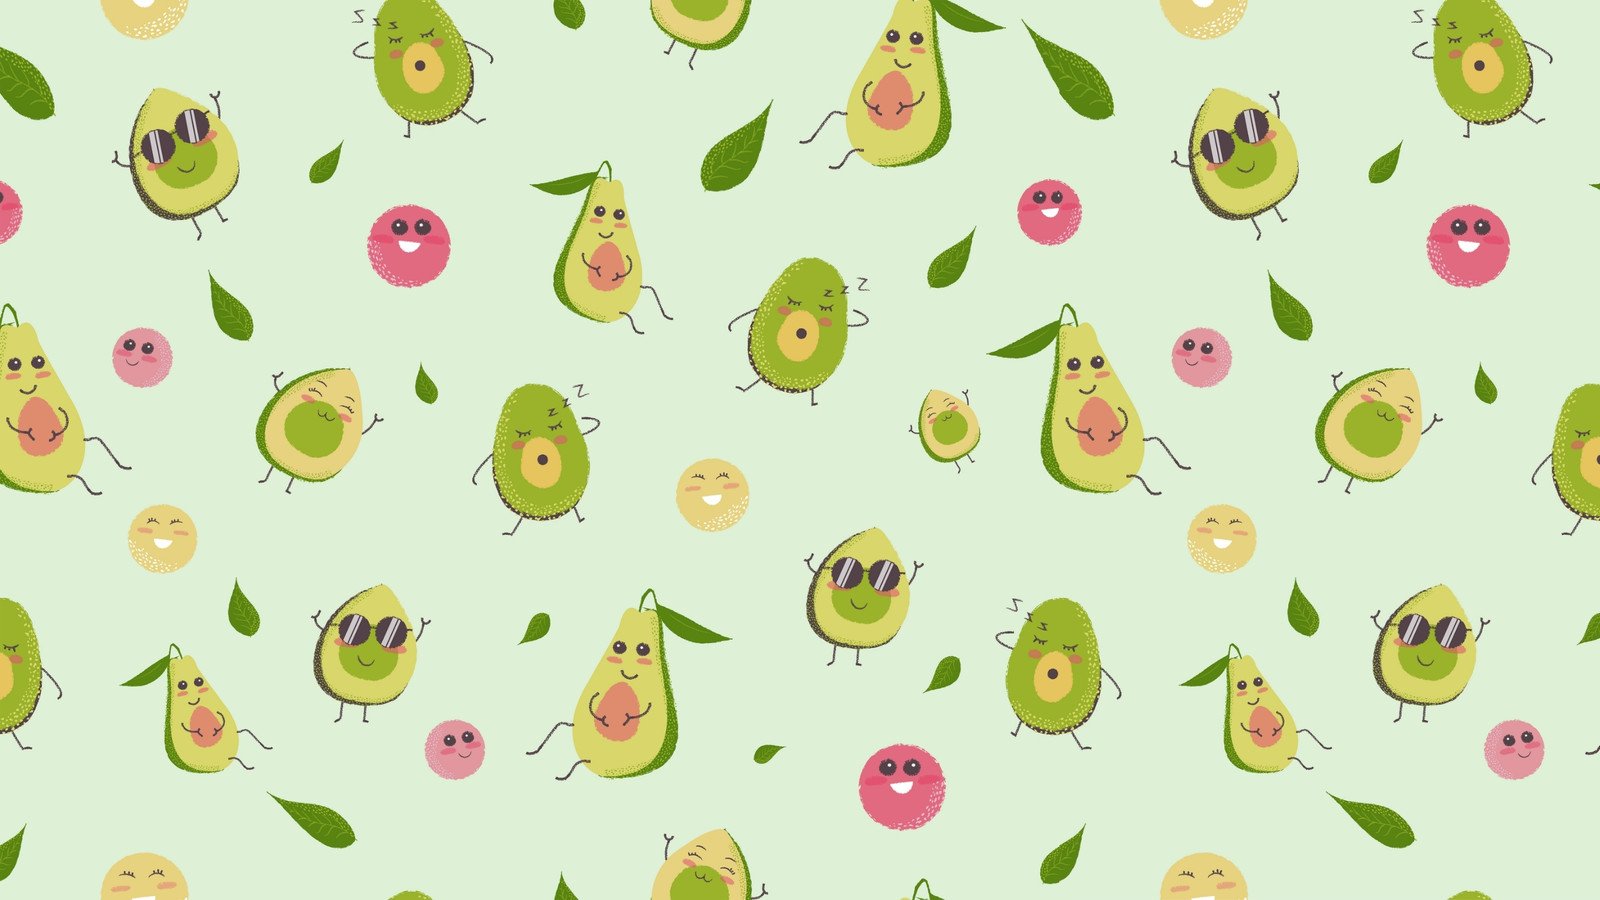 A pattern of avocados and leaves - Avocado